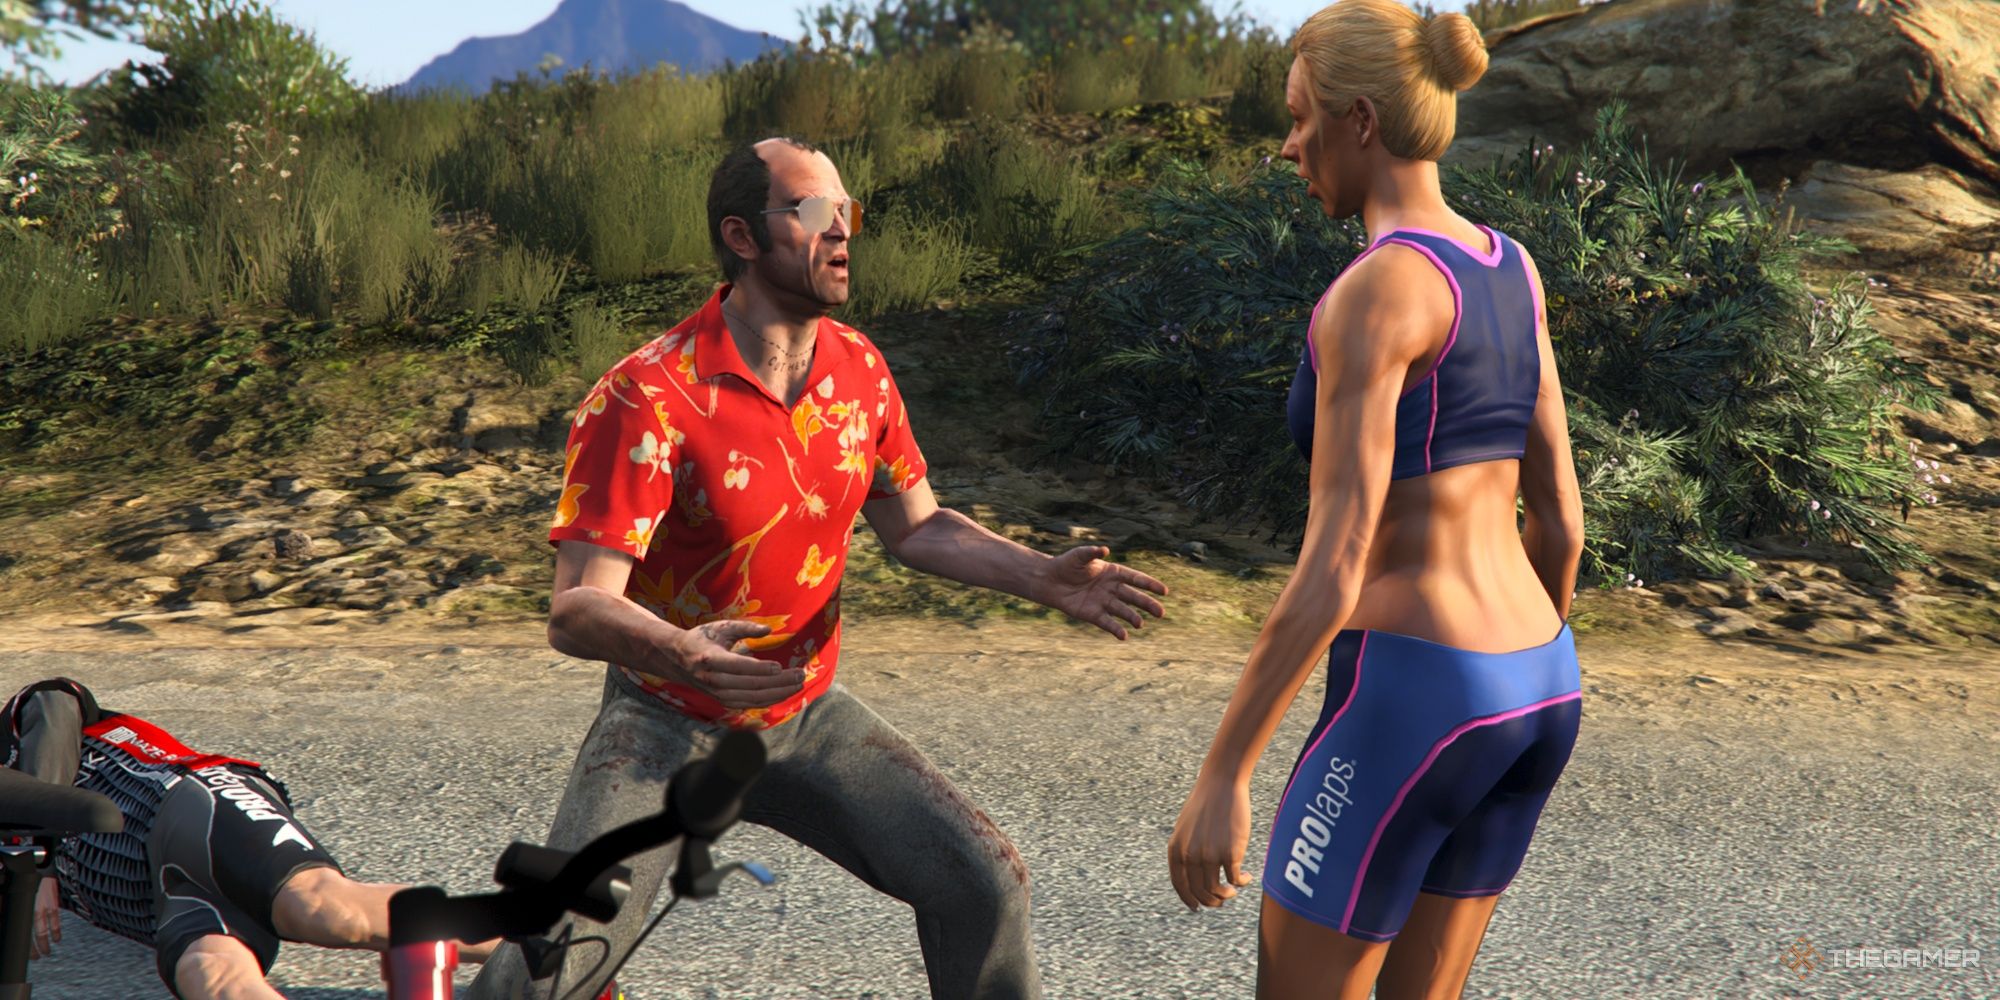 Trevor meeting with Mary-Ann in GTA5